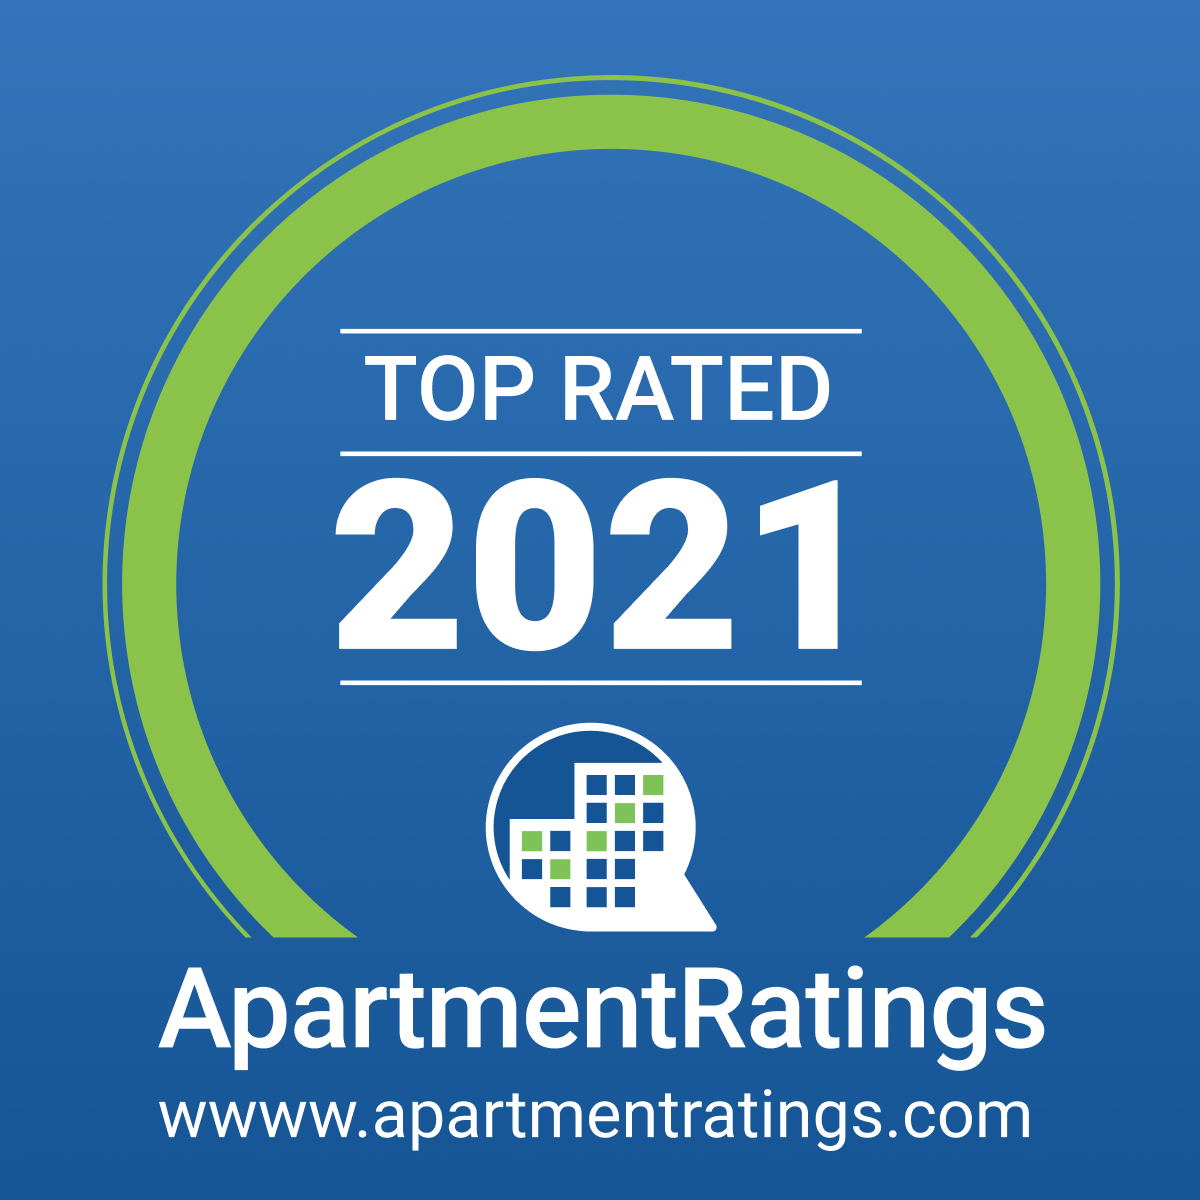 Renaissance Place is Top Rated Again!-image